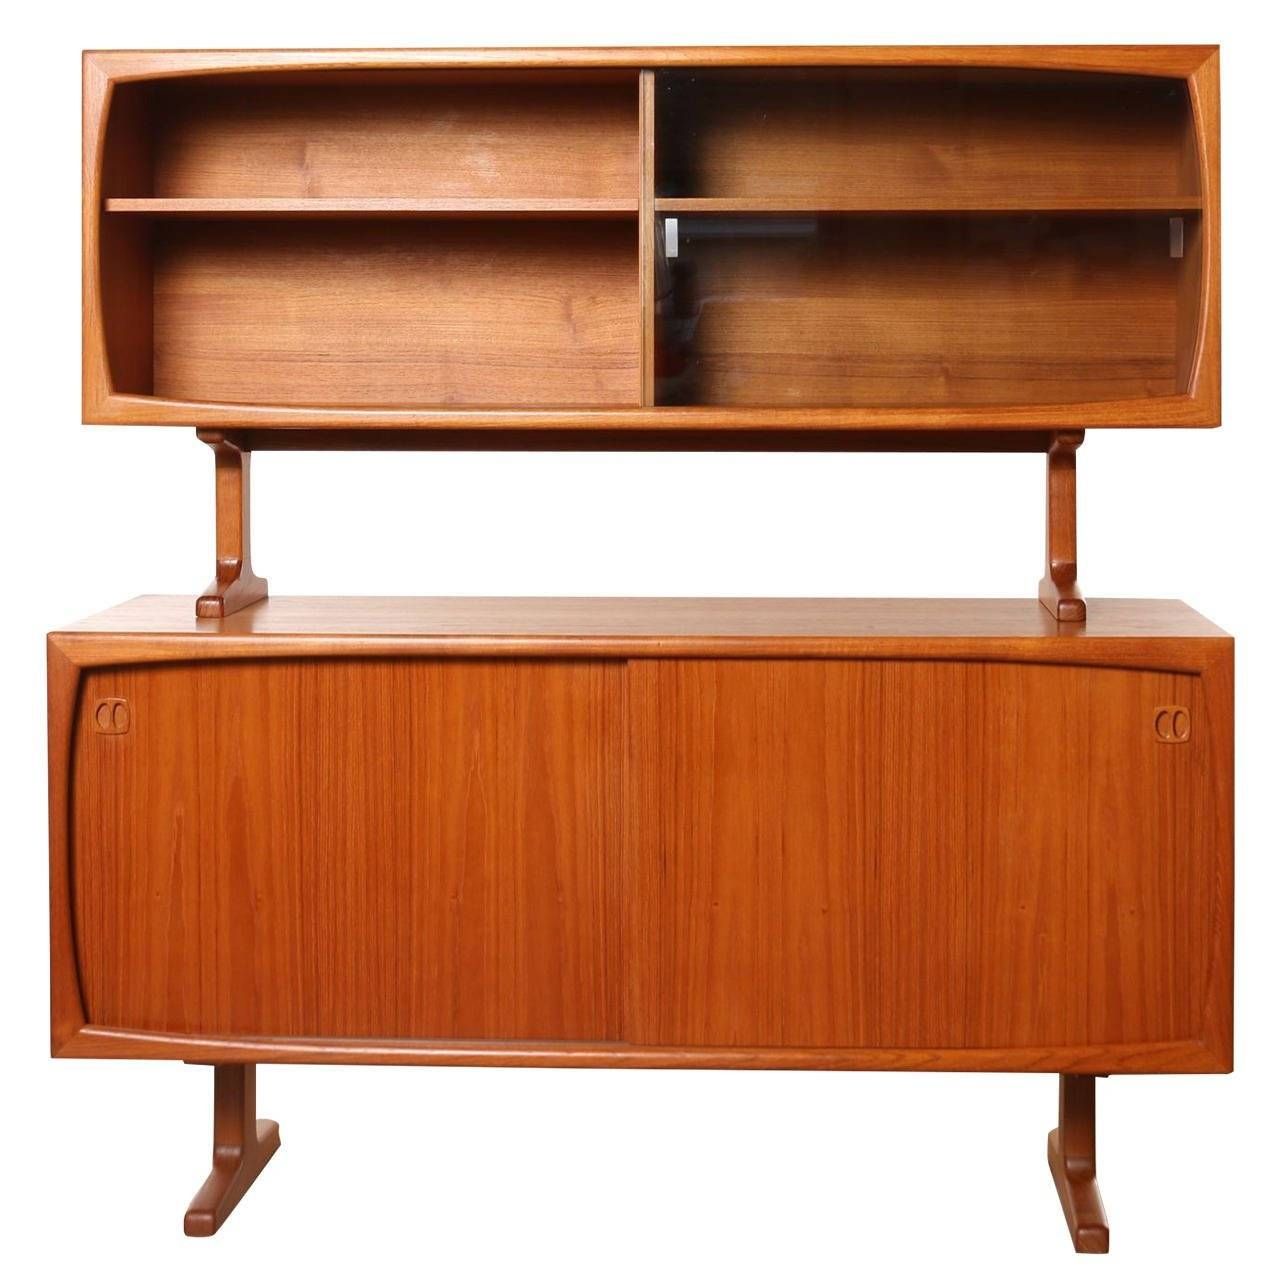 Scandinavian Design Teak Credenza With Hutch, Denmark At 1stdibs Within Sideboard With Hutch (View 15 of 20)